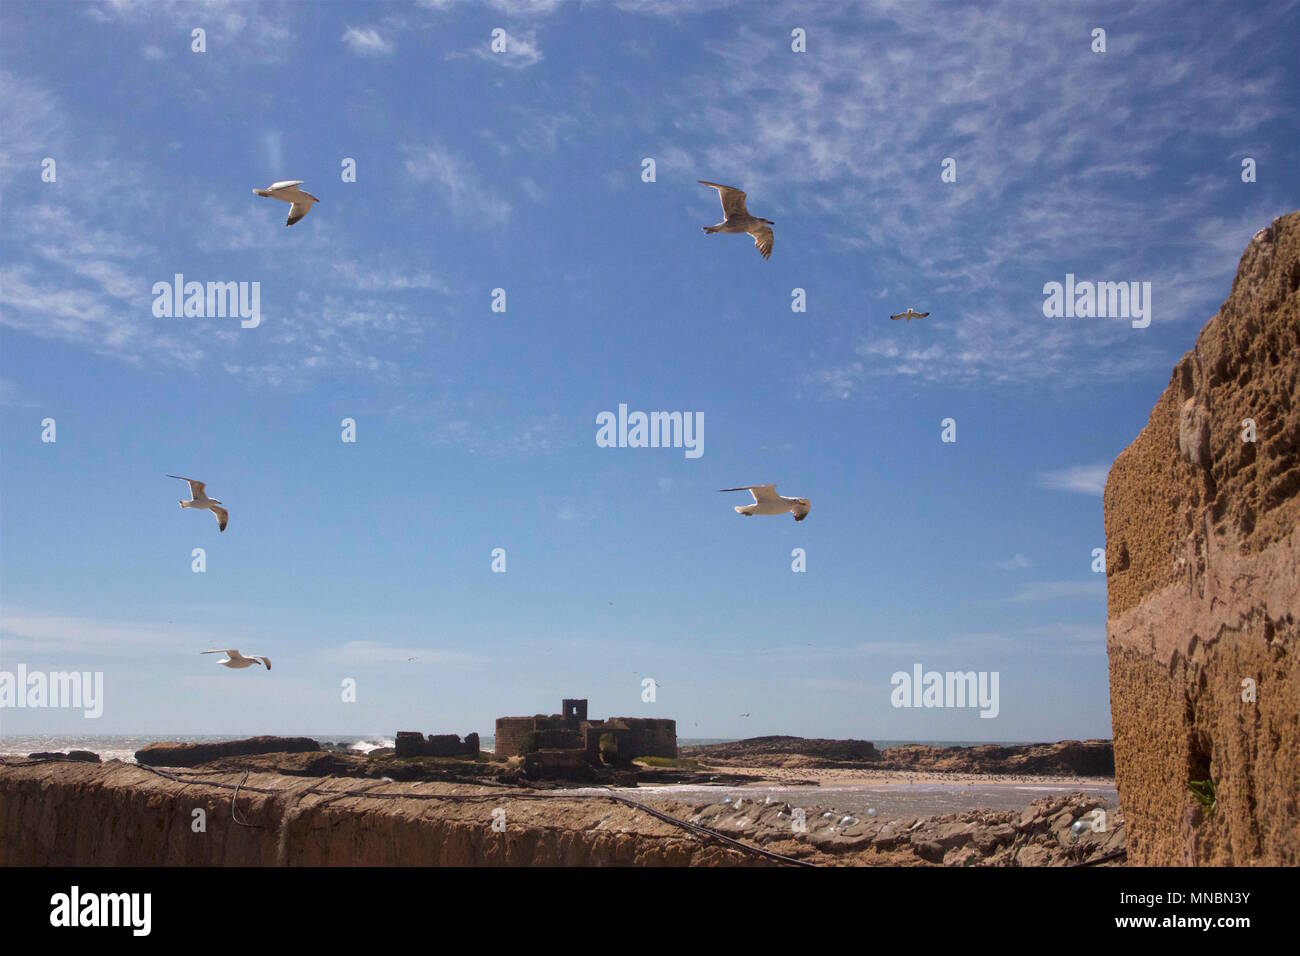 Circling gulls over Ile de Mogador (Mogador Island) which is off the coast of Essaouira, Morocco. The island is now a nature reserve. Stock Photo